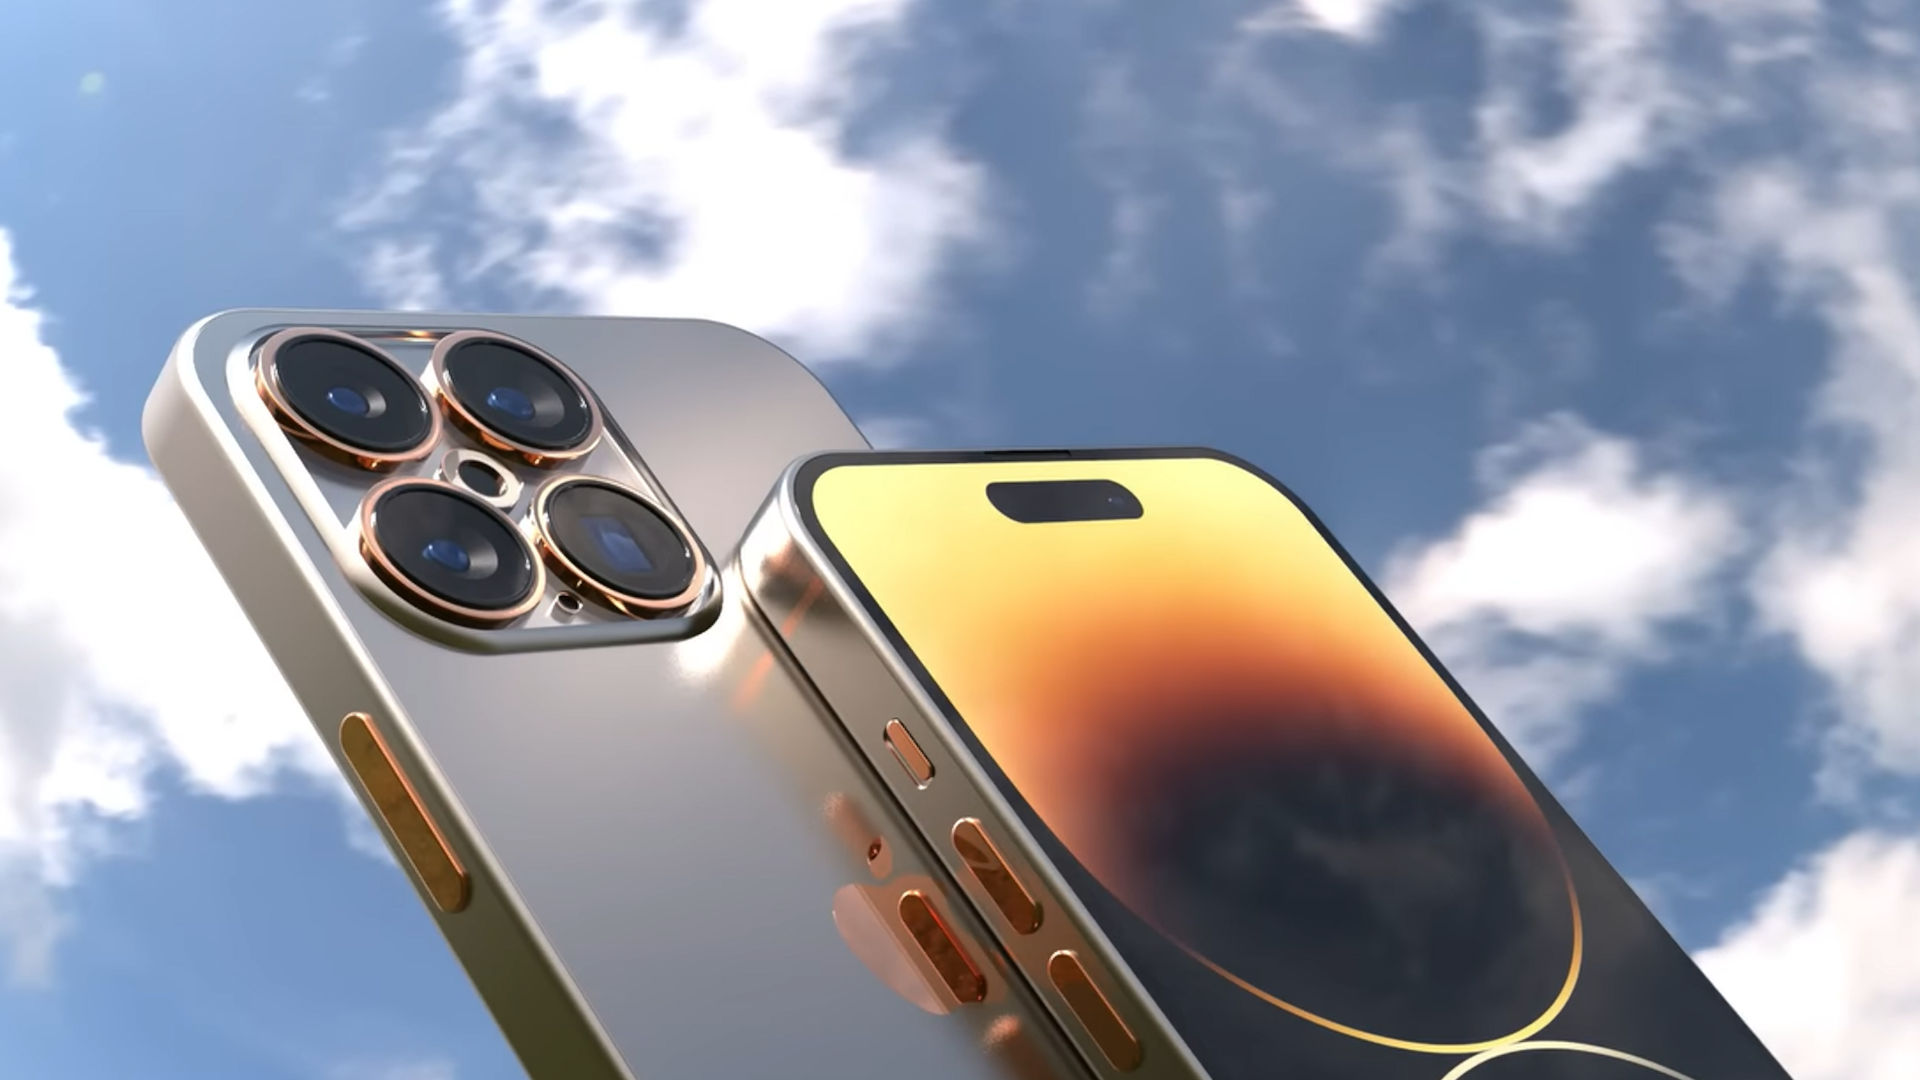 We might get an iPhone Ultra in 2024